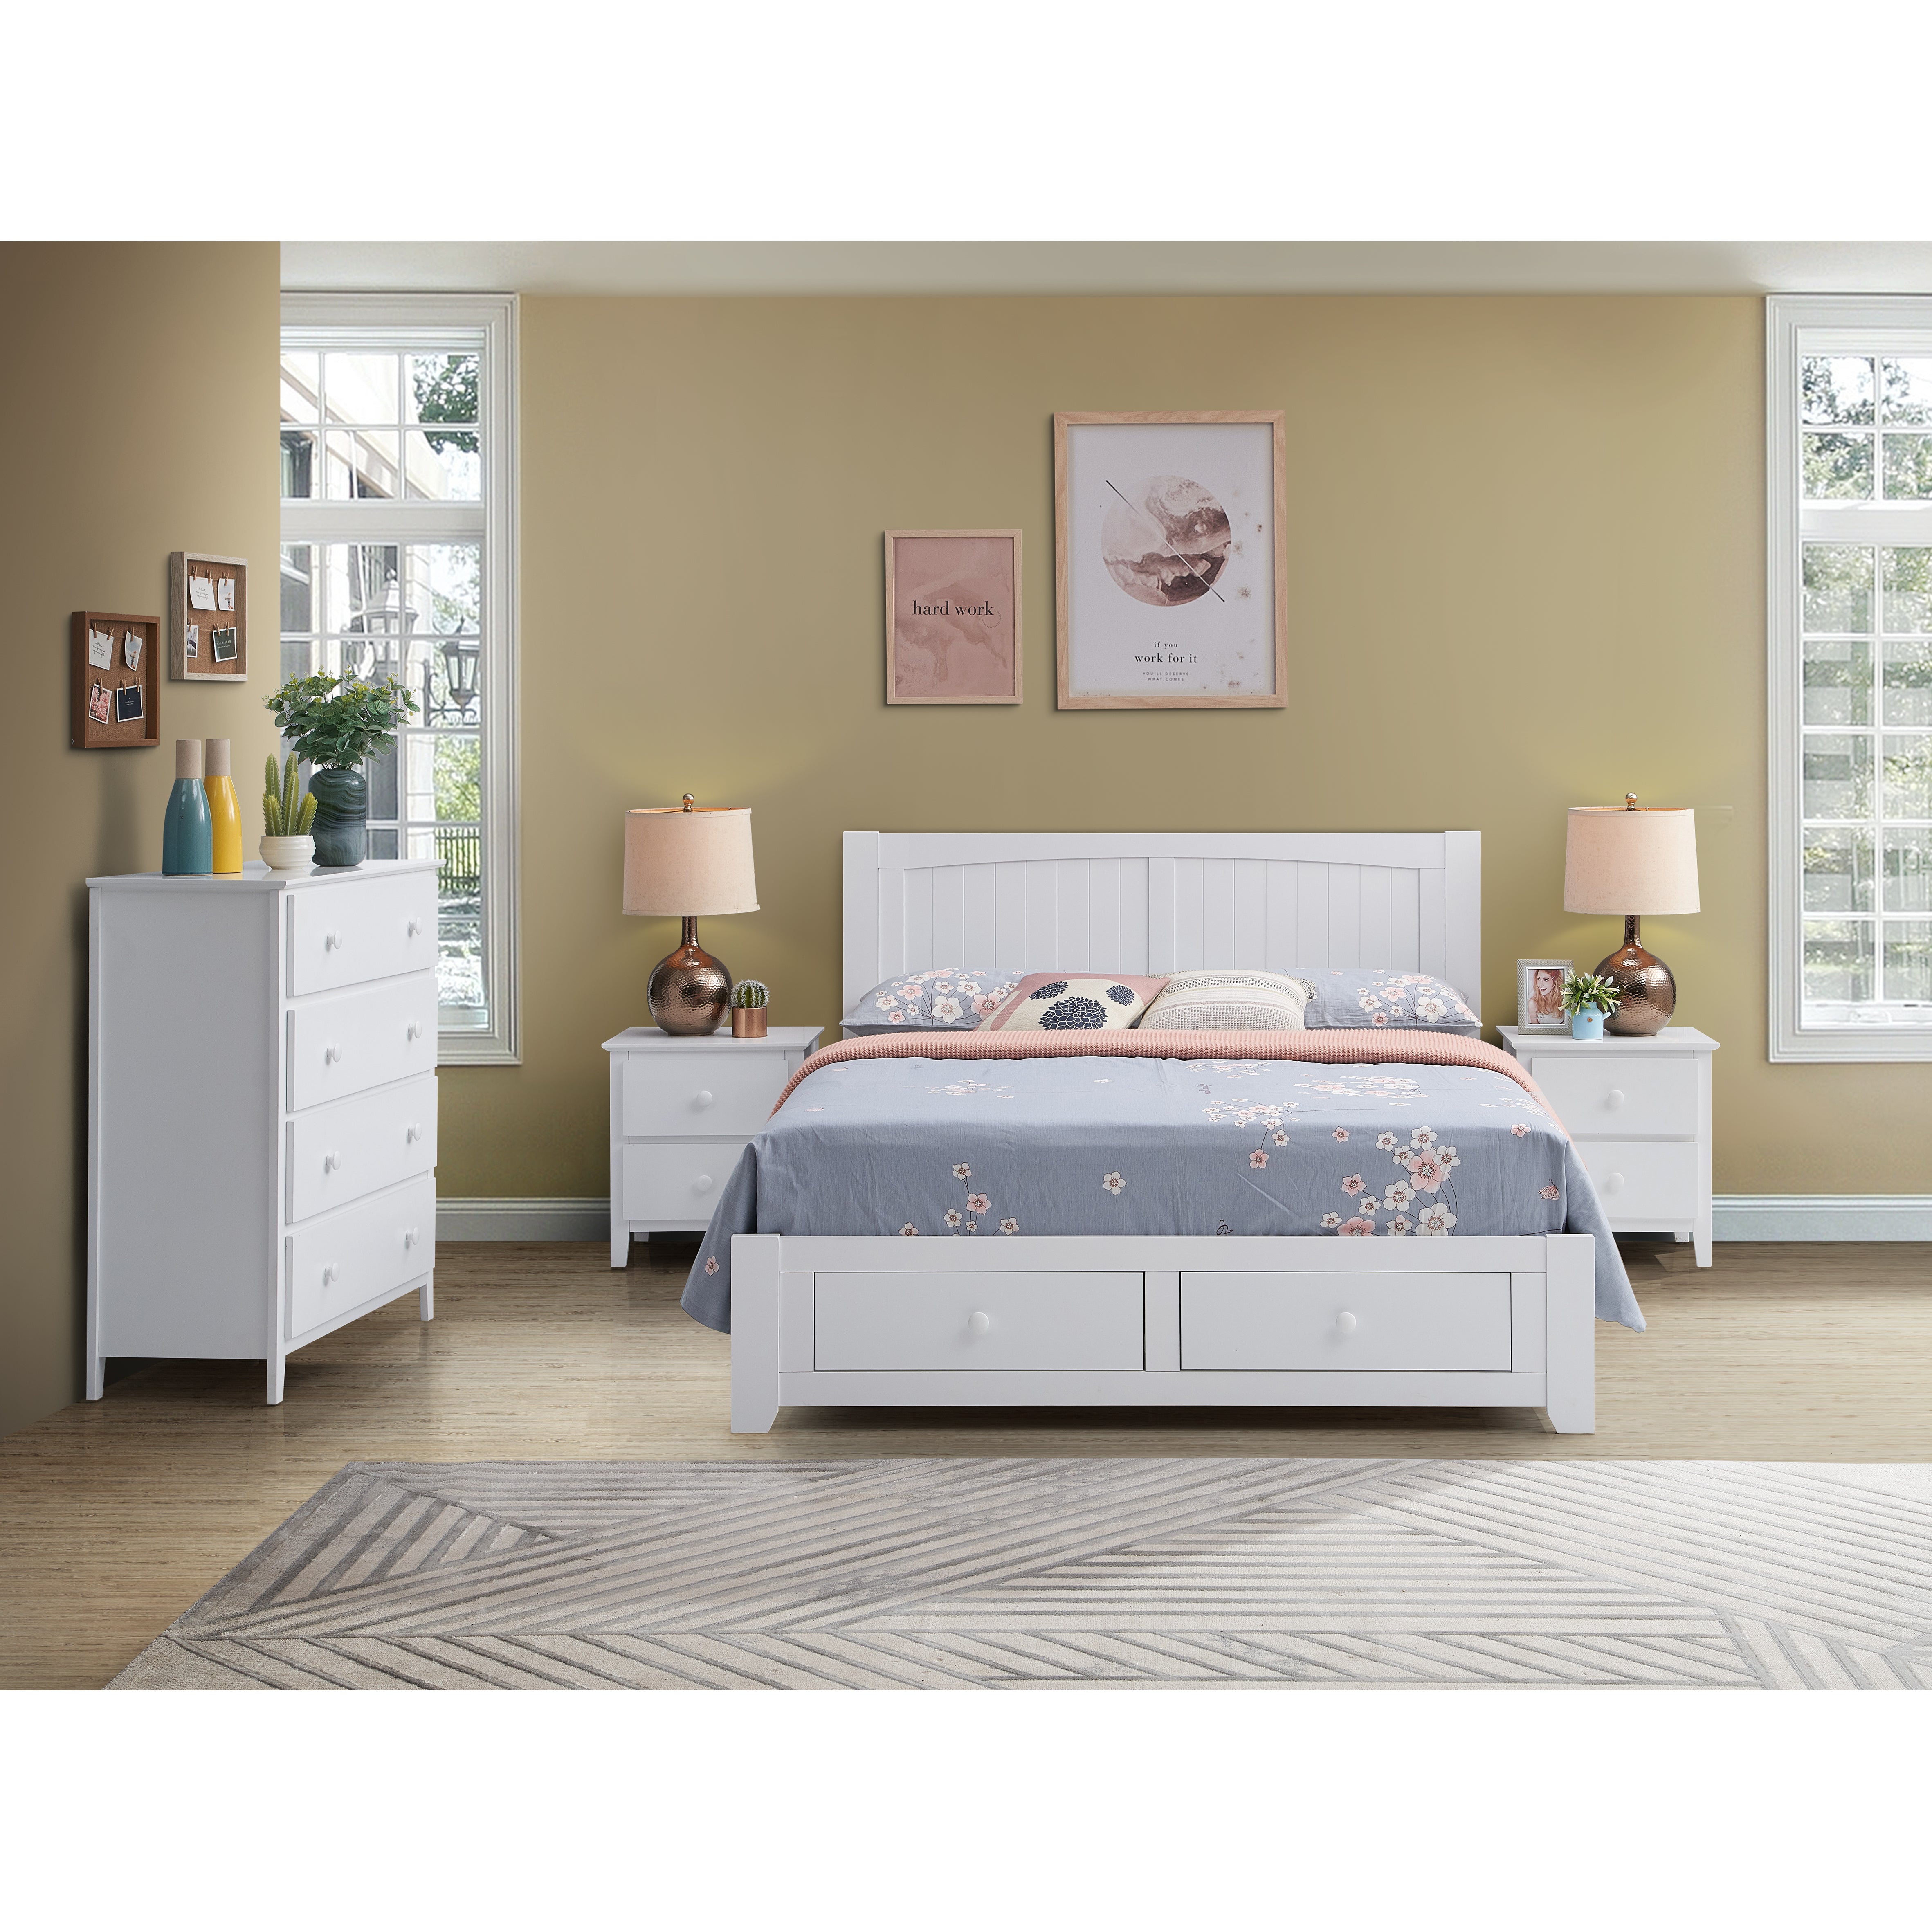 Wisteria 4pc Queen Bed Suite Bedside Tallboy Bedroom Set Furniture Package - WHT - SILBERSHELL